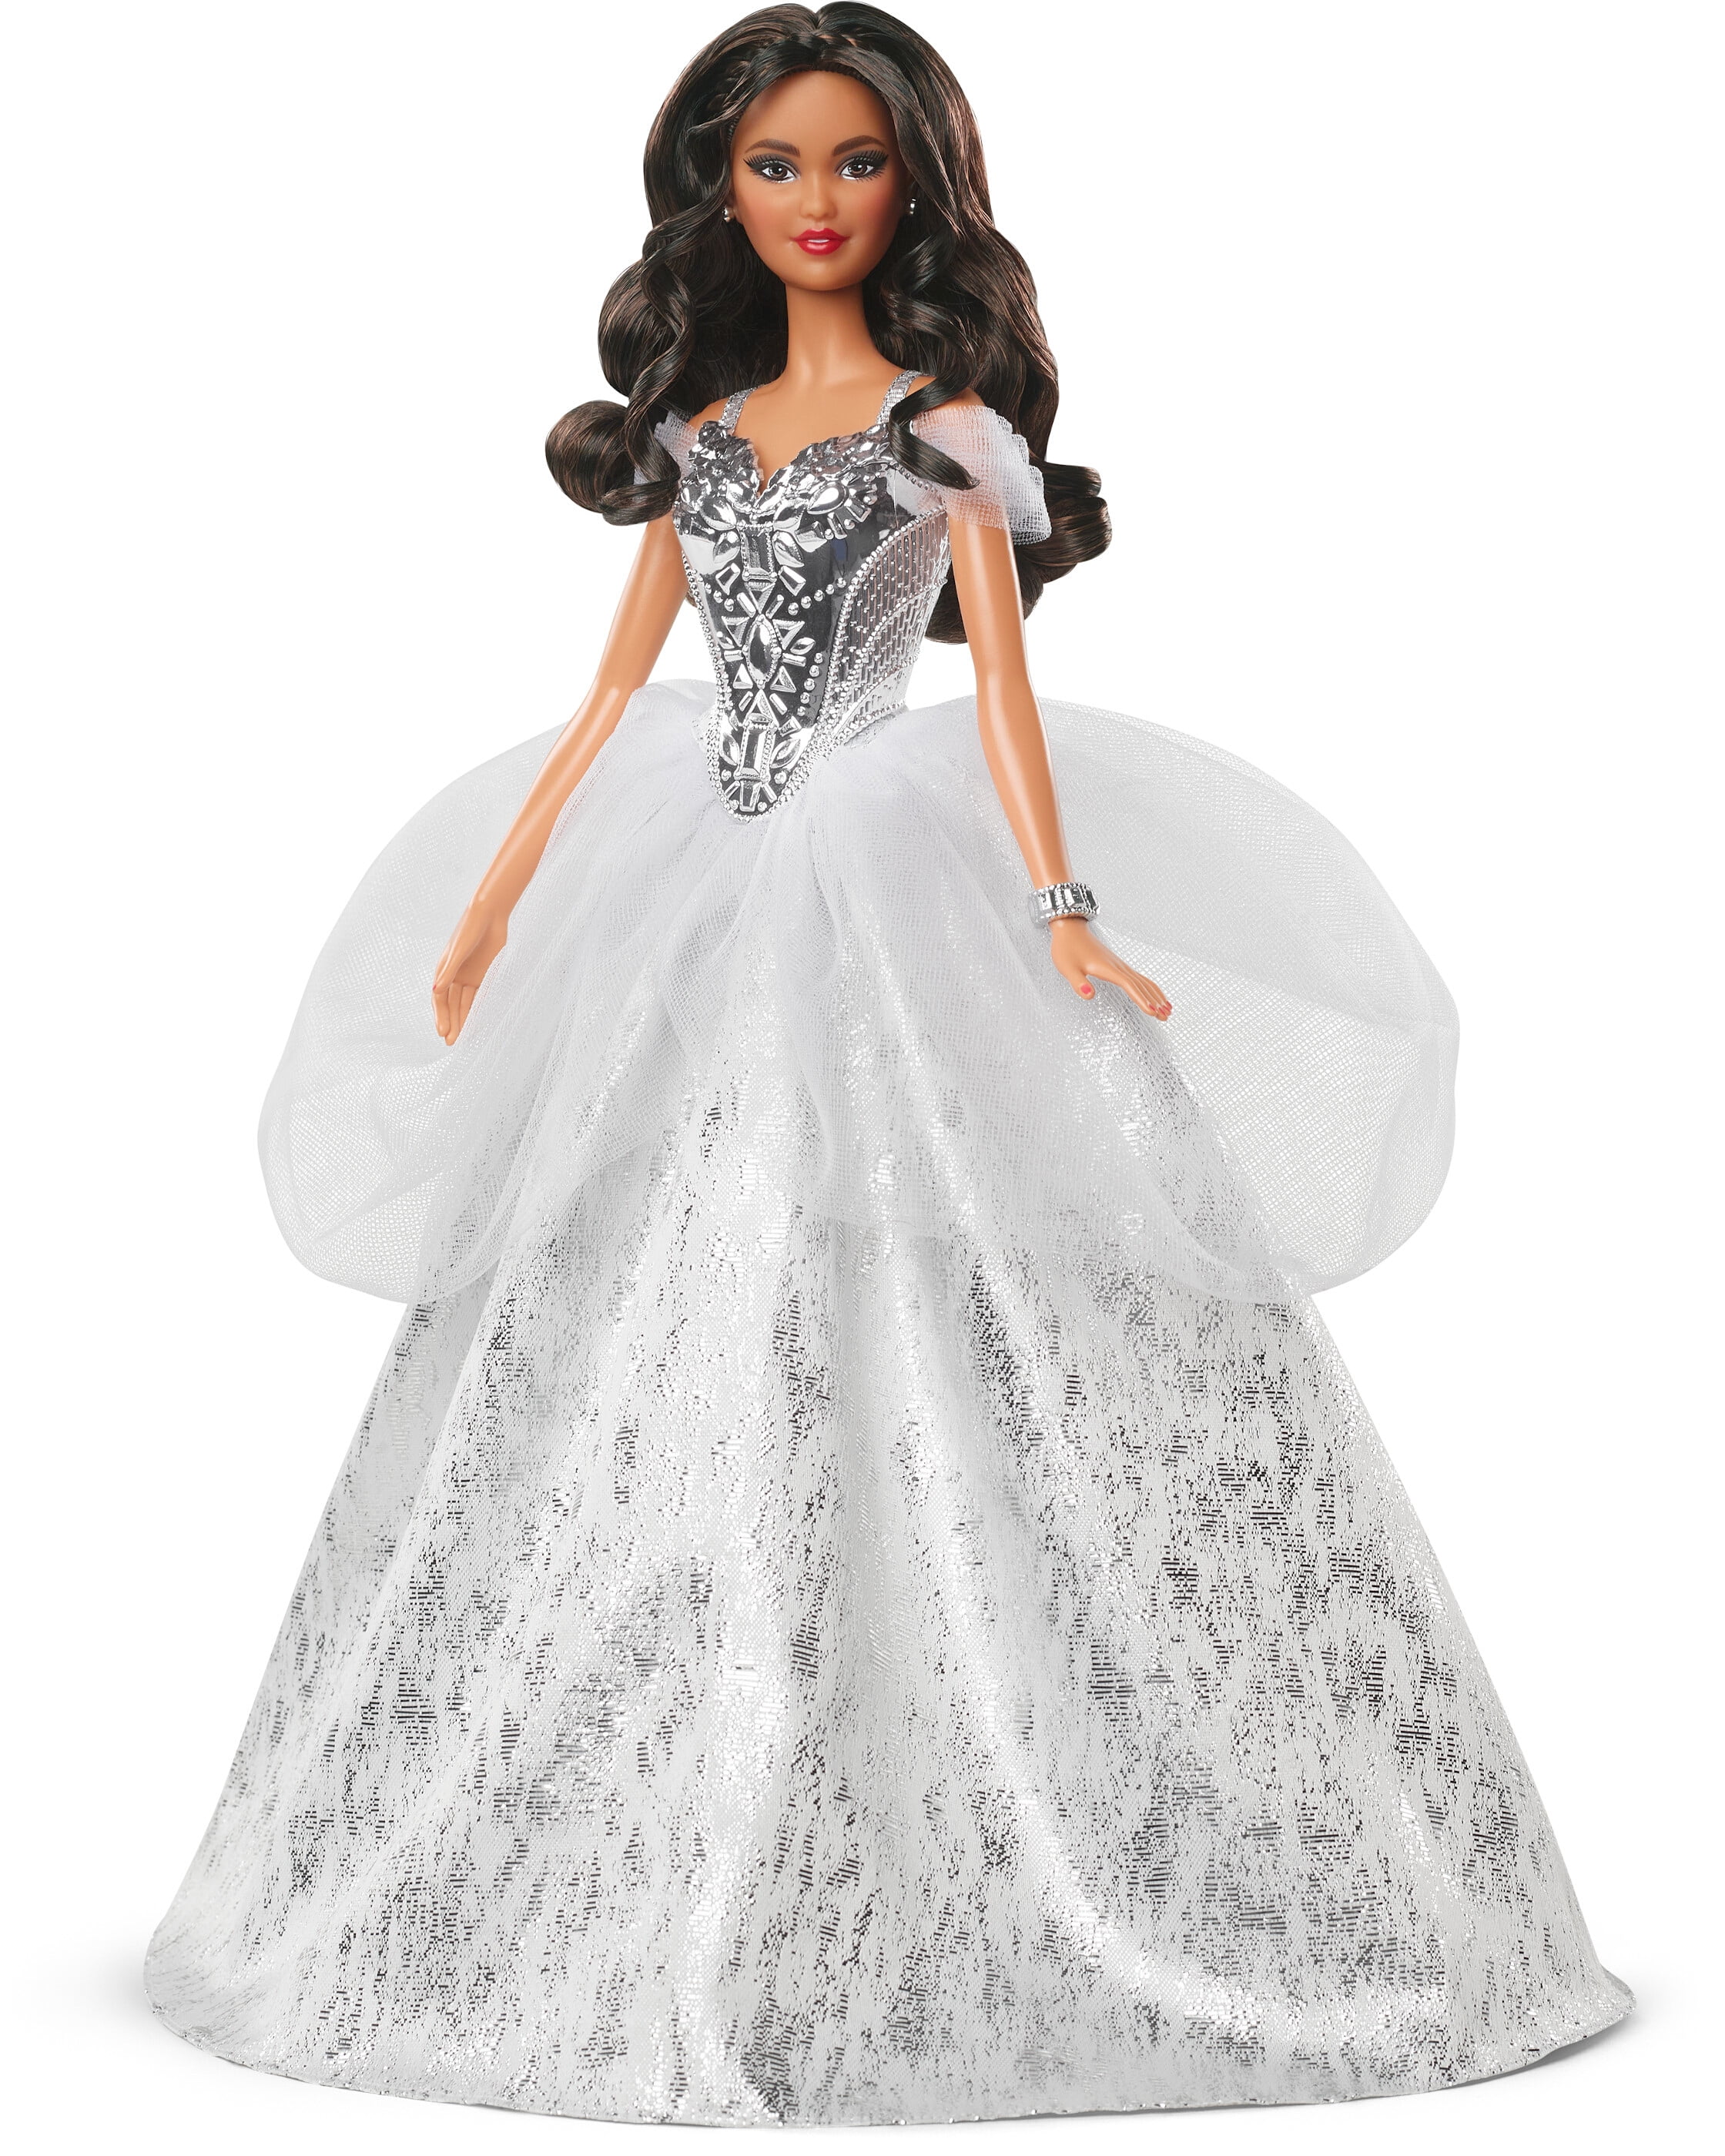 Barbie Signature 2021 Holiday Barbie Doll (12-inch Brunette Curly Hair) In Silver Gown